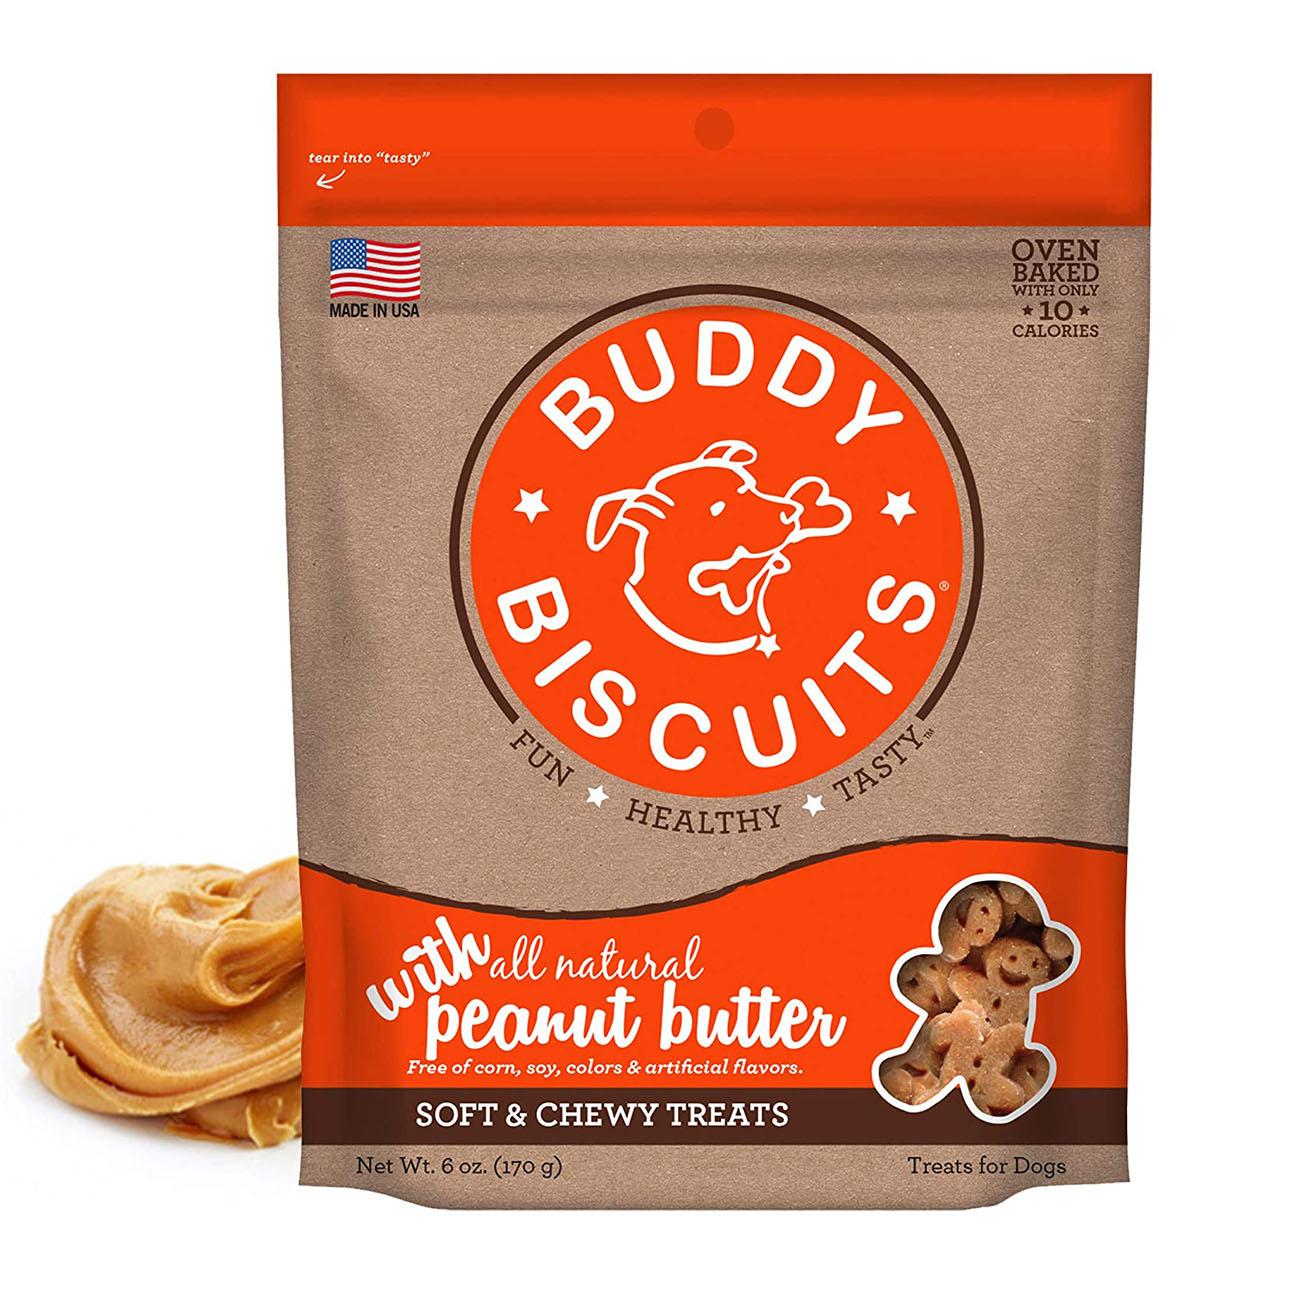 Buddy Biscuits Whole Grain Soft & Chewy Dog Treats - Peanut Butter